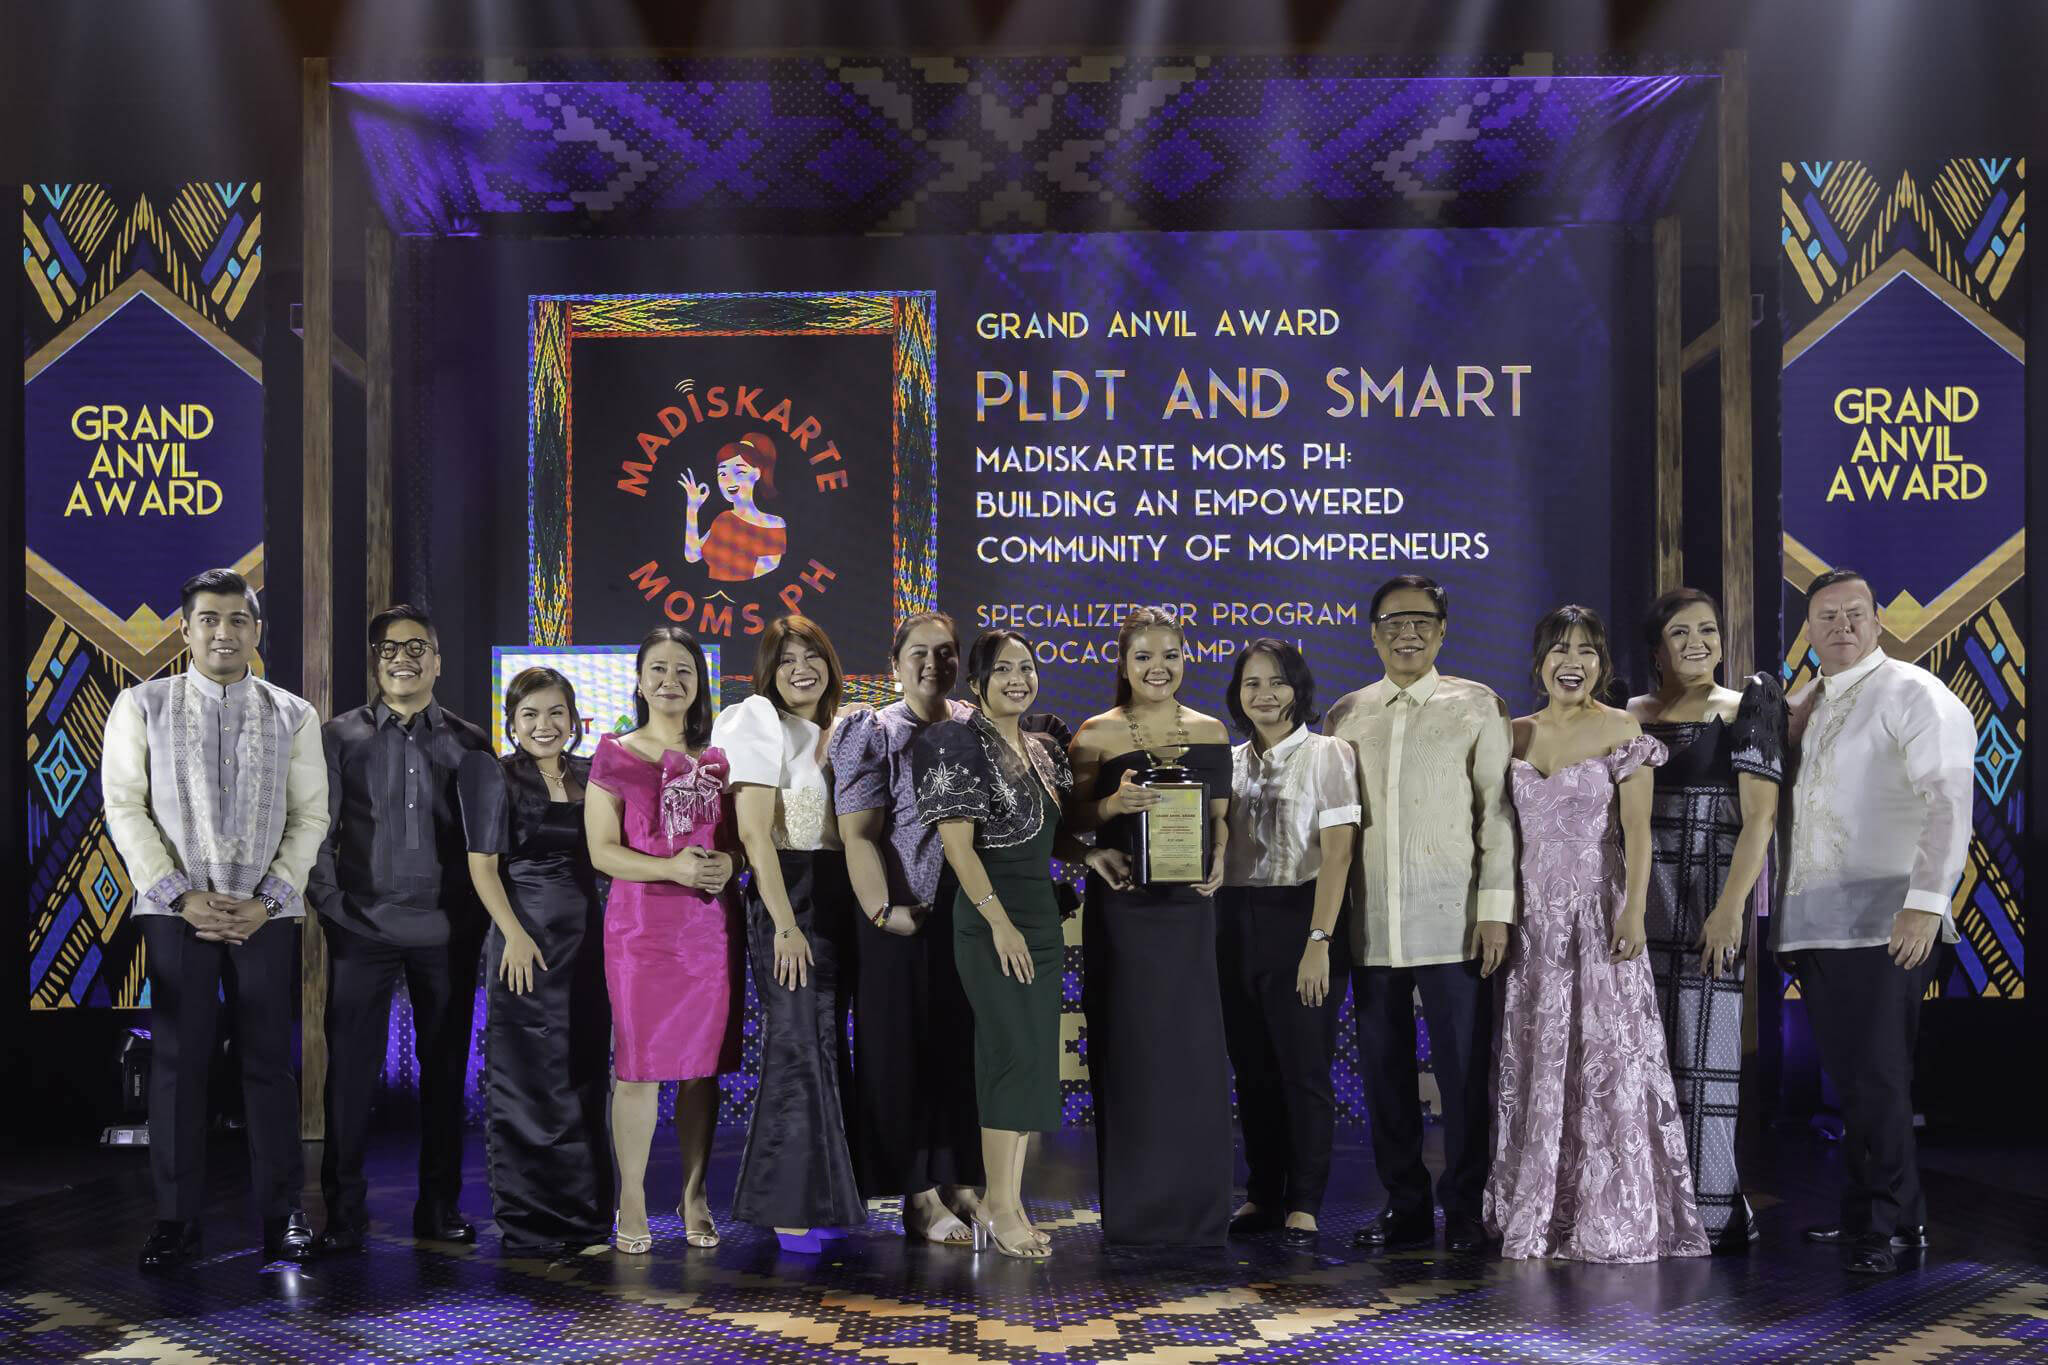 PLDT Home’s Madiskarte Moms PH community won the Grand Anvil Award. In this photo (L-R): PRSP President Harold Geronimo, Stratworks, Inc. Managing Director Mark Christian Parlade, PLDT Home Head of Digital Content Marketing Mabie Encarnacion, PLDT Home Manager for Fixed Wireless Postpaid Kat Yulo, PLDT Home AVP and Head of Digital Services Janice Lagaso, PLDT Home Senior Manager for Marketing Communications Linette Garcia-Perez, PLDT Home Product Manager for Entertainment Tin Rementilla,  PLDT Home PR Manager and Community Lead for MMPH Daphne Gripal, PLDT Home Digital Marketing Specialist Elaine Lara, Former Secretary of Trade and Education, Former DTI and DepEd Secretary and Alliance Global Group Independent Director Jesli A. Lapus, PLDT Home AVP and Head of Public Relations and Influencer Management Cheryl Maxine Loyola, PRSP Trustee and Chairperson 58th Anvil Awards Georgina “Joji” Banzon, and Global Alliance for Public Relations and Communication Management President and CEO Justin Green.